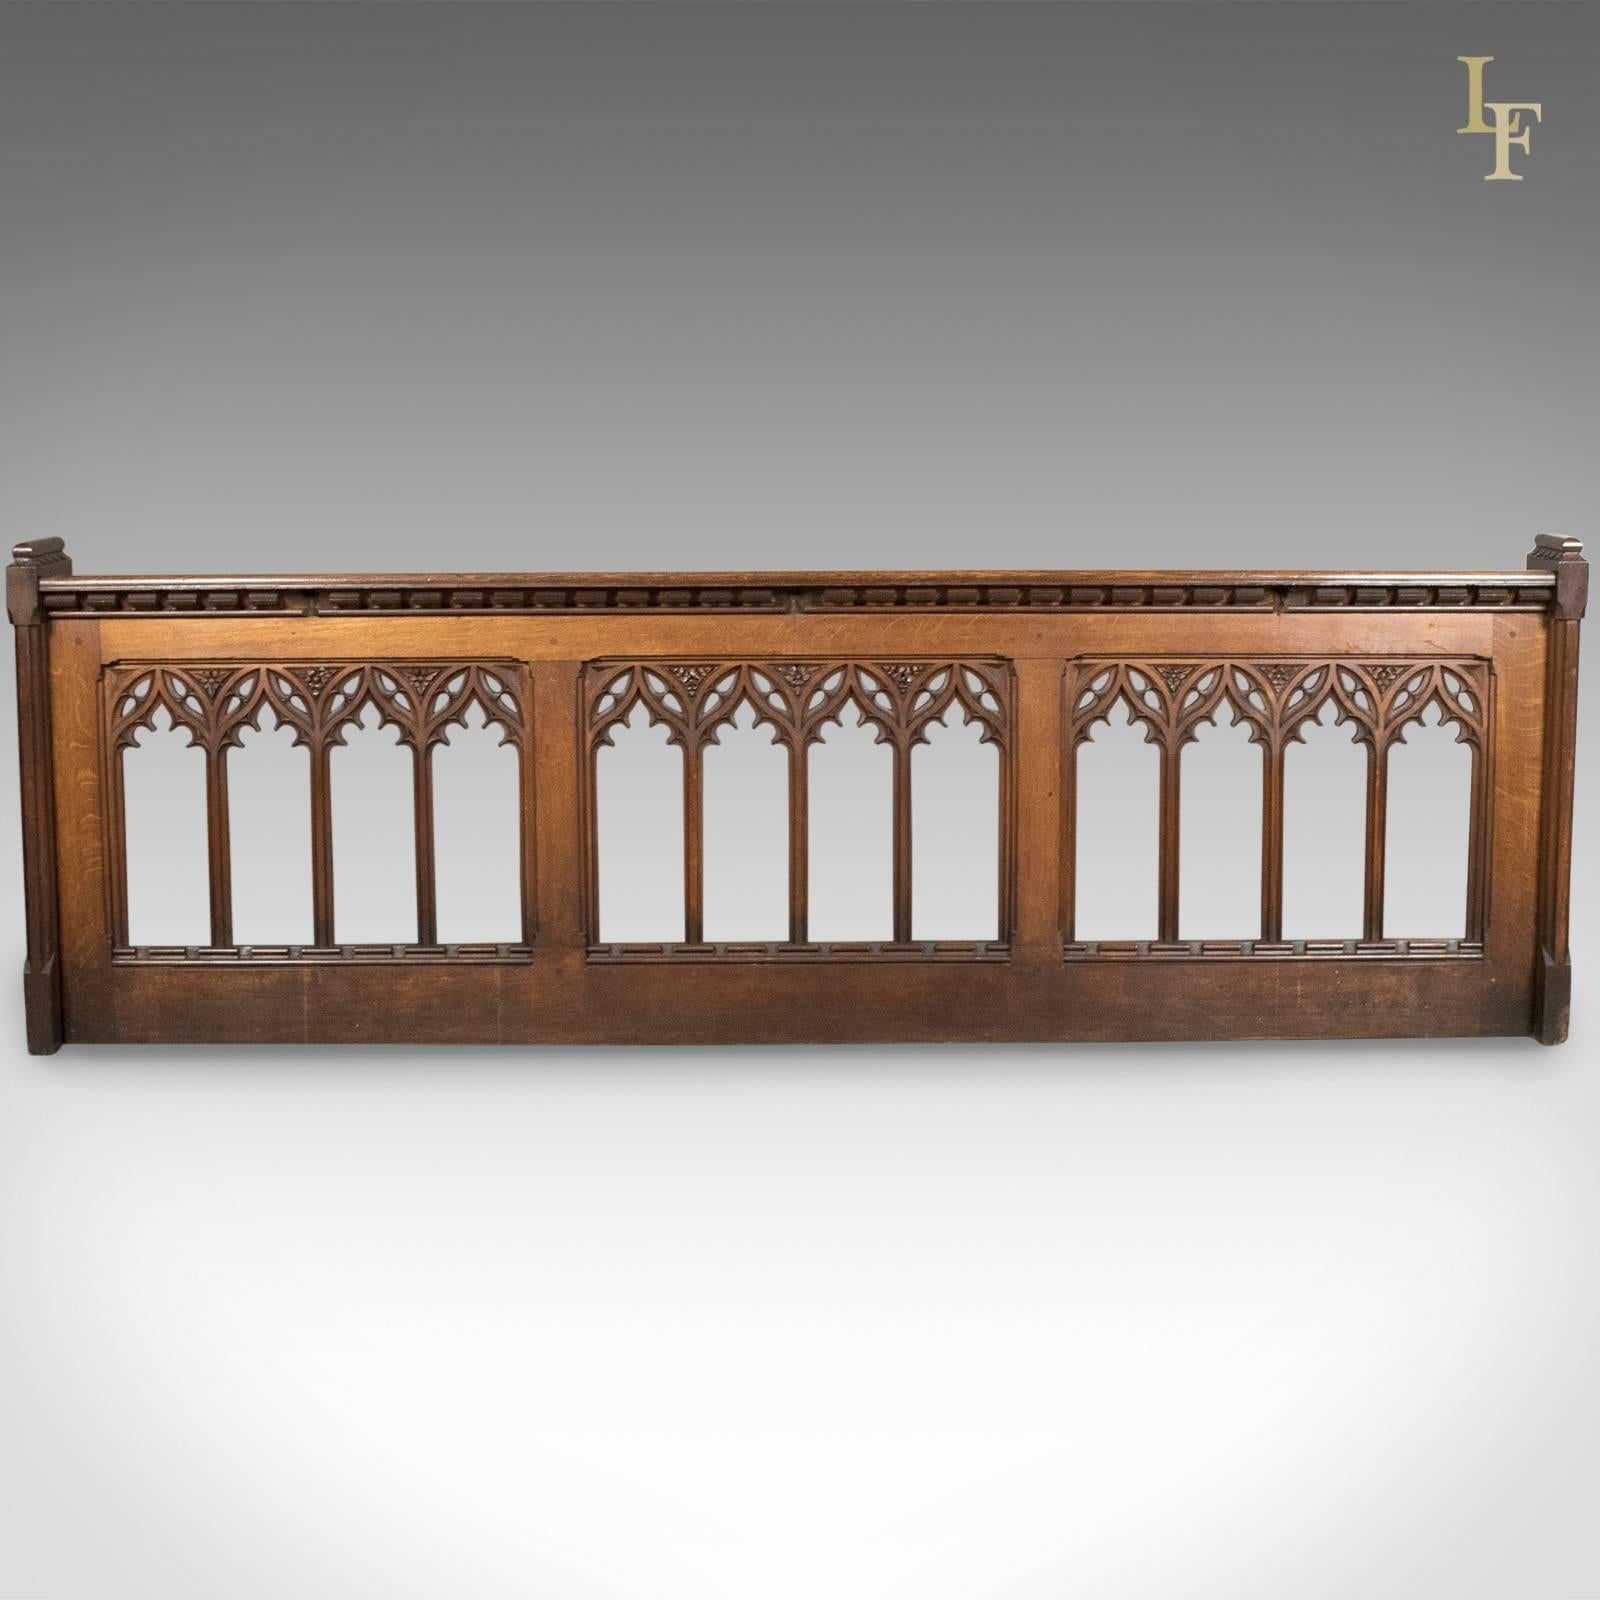 This is an antique pew front, a Victorian gothic choir stall in English oak with Pugin overtones dating to circa 1880.

Superbly carved and in fine order
Golden hues to the well figured oak
Robust and sturdy with a variety of uses

An